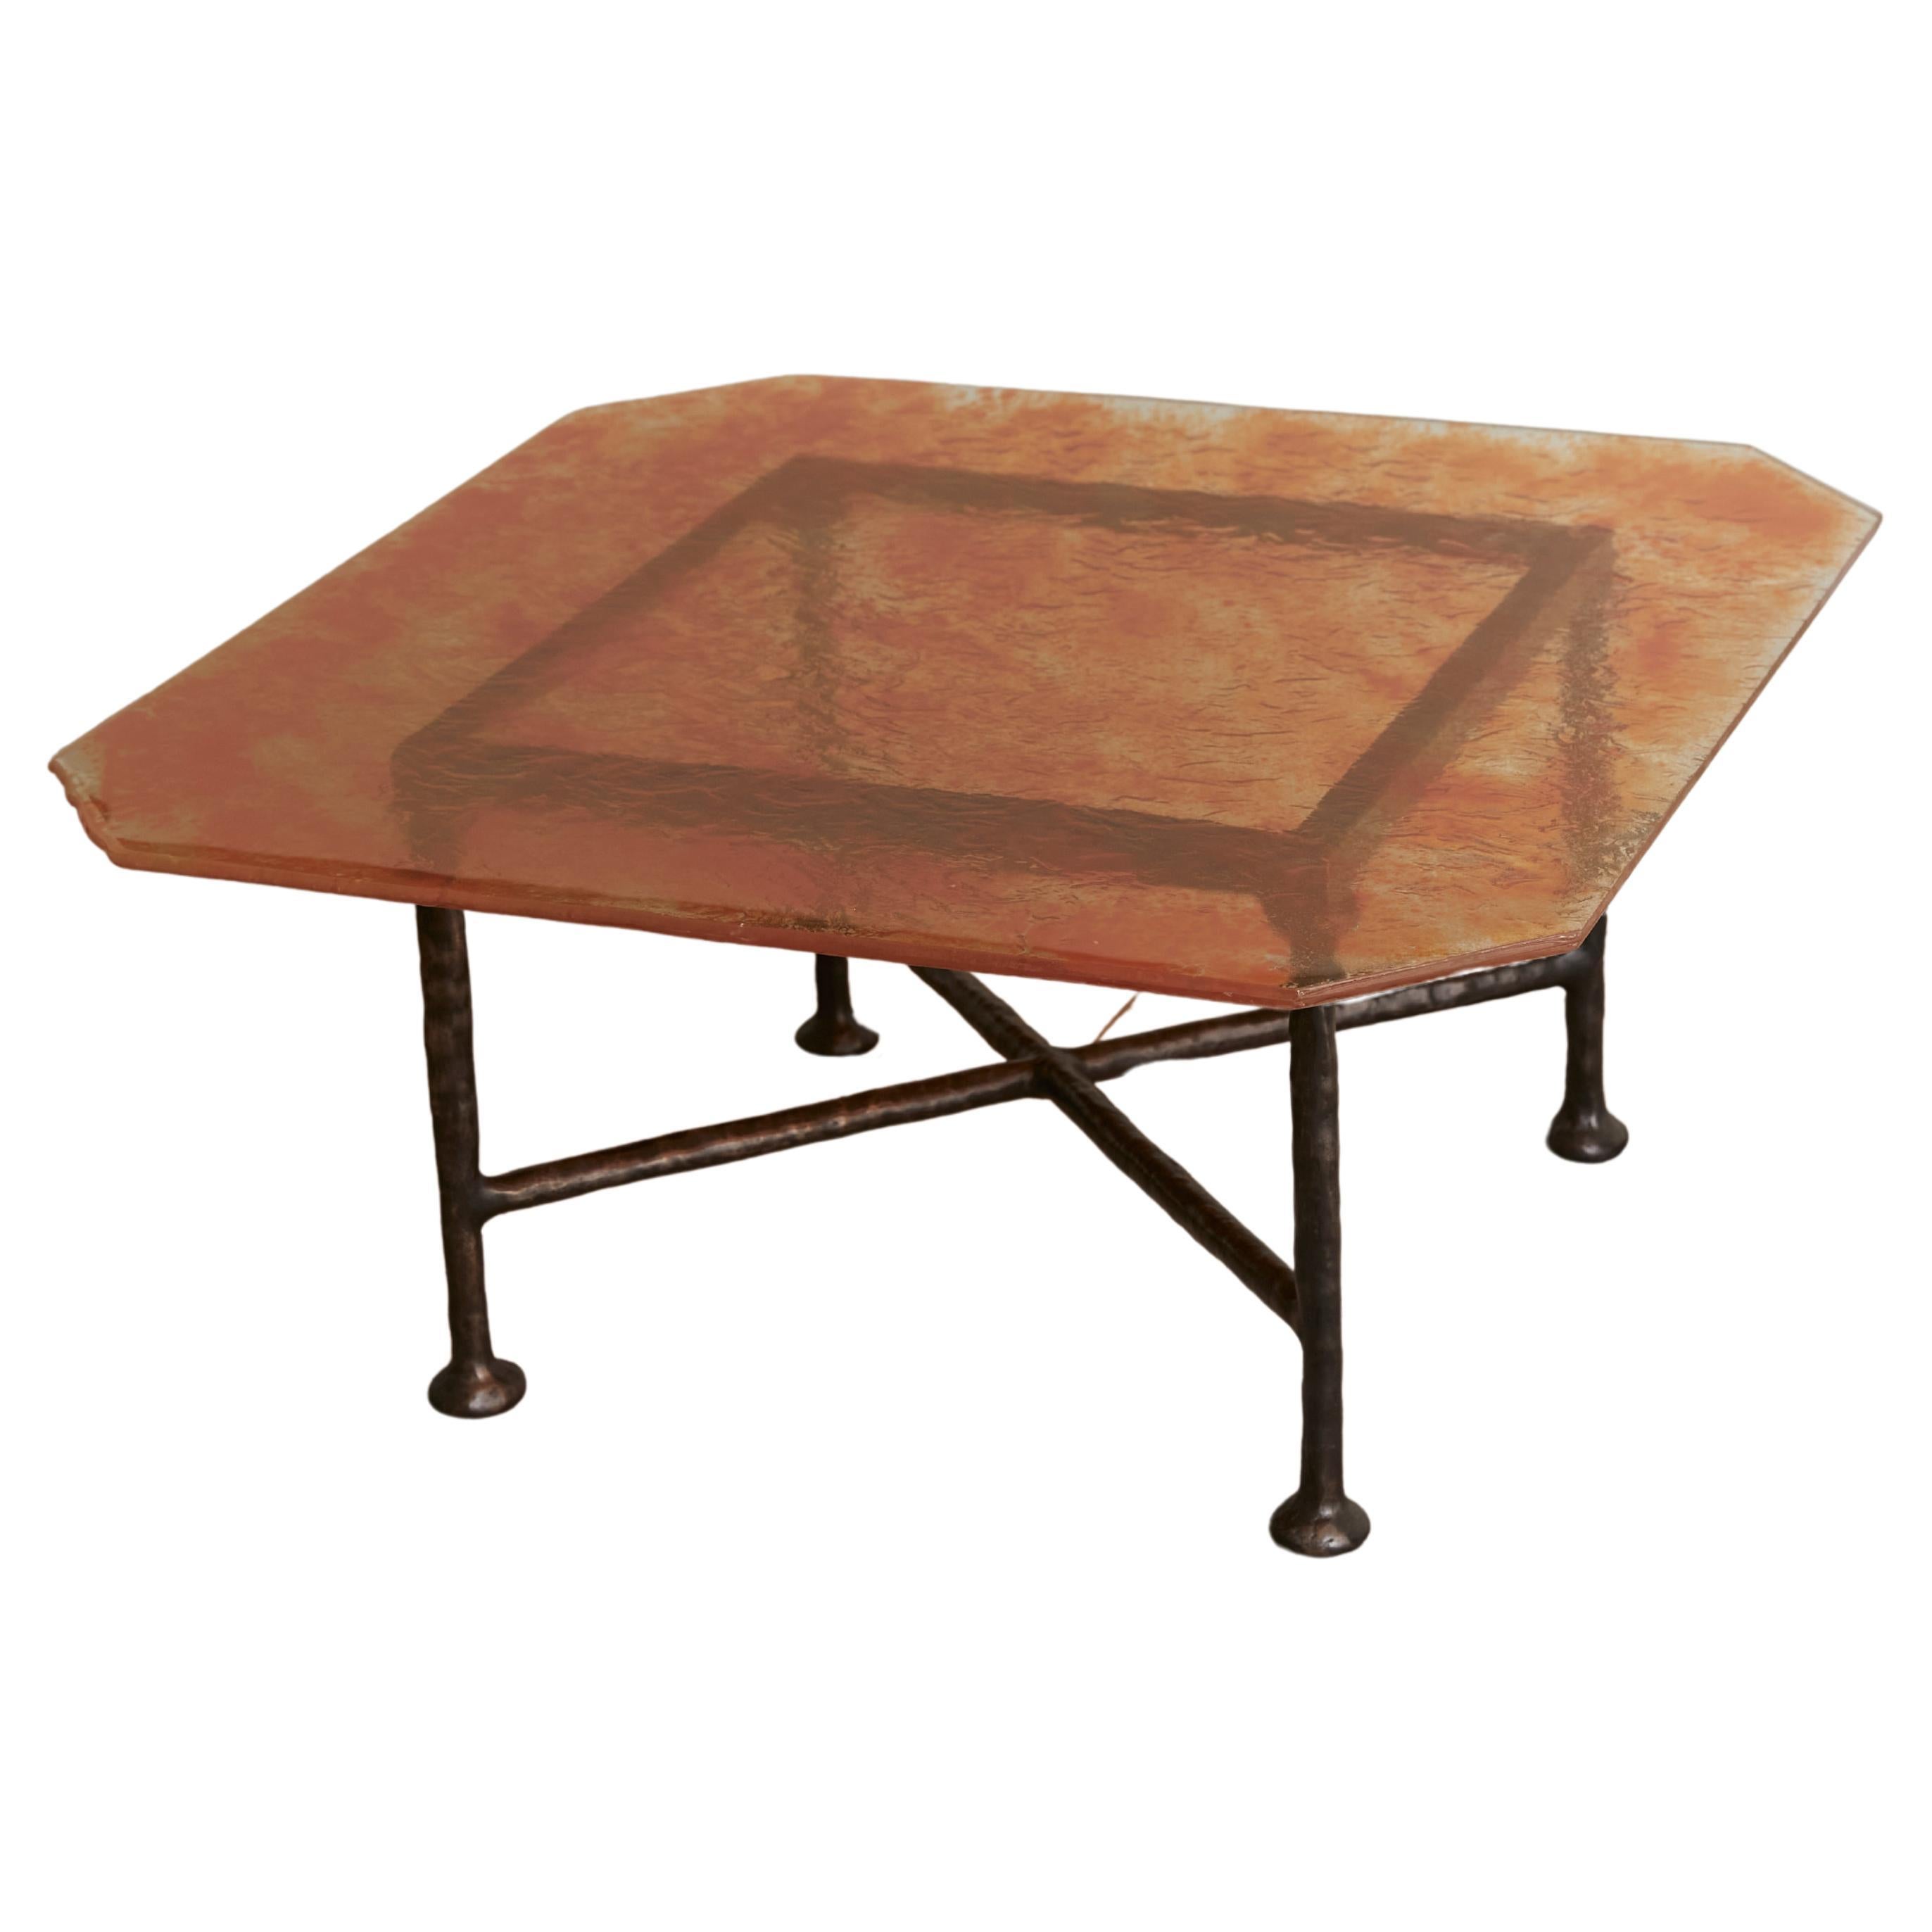 Pulver Iron table, bronze sculptured structure and handmade glass table top. For Sale